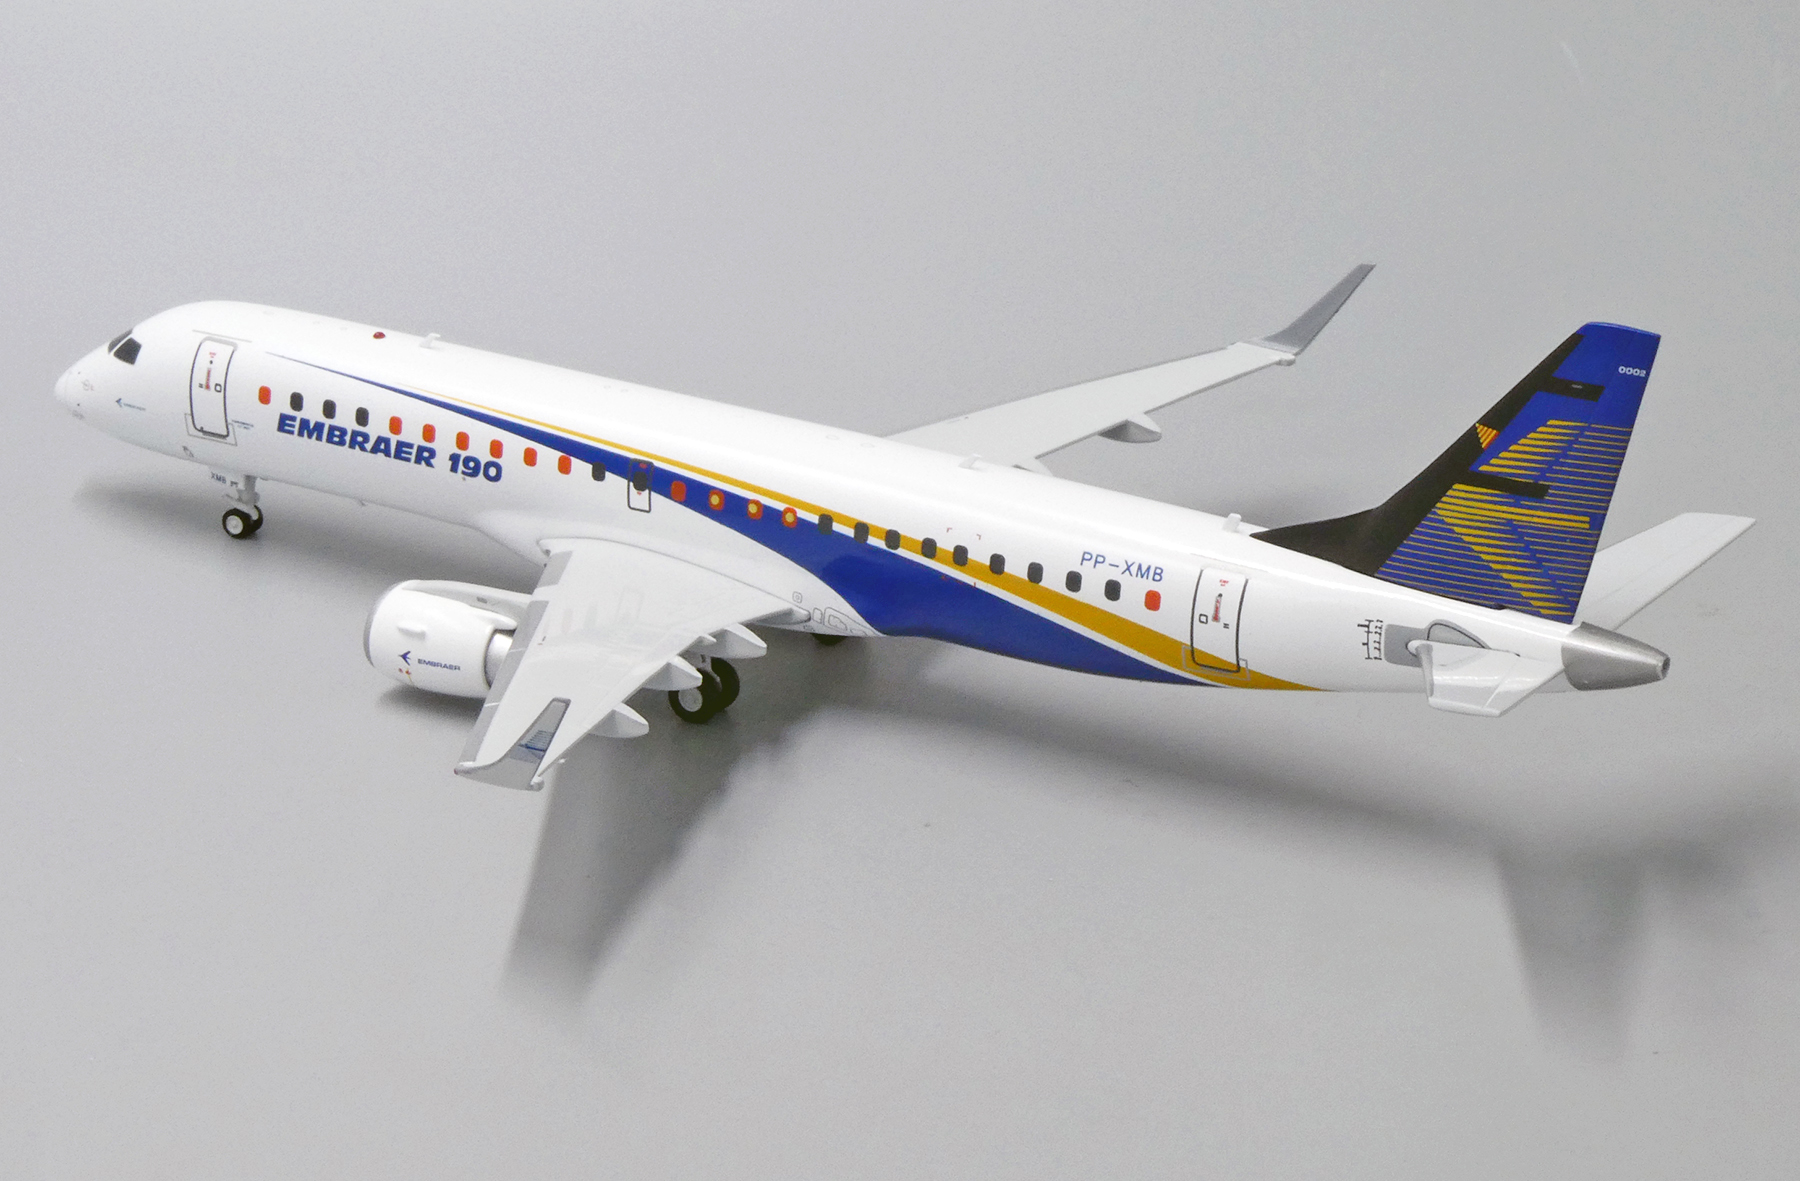 Details about   JCWINGS JCLH2221 1/200 EMBRAER 190 E-JETS AROUND THE WORLD REG:PP-XMB W/S 120PCS 